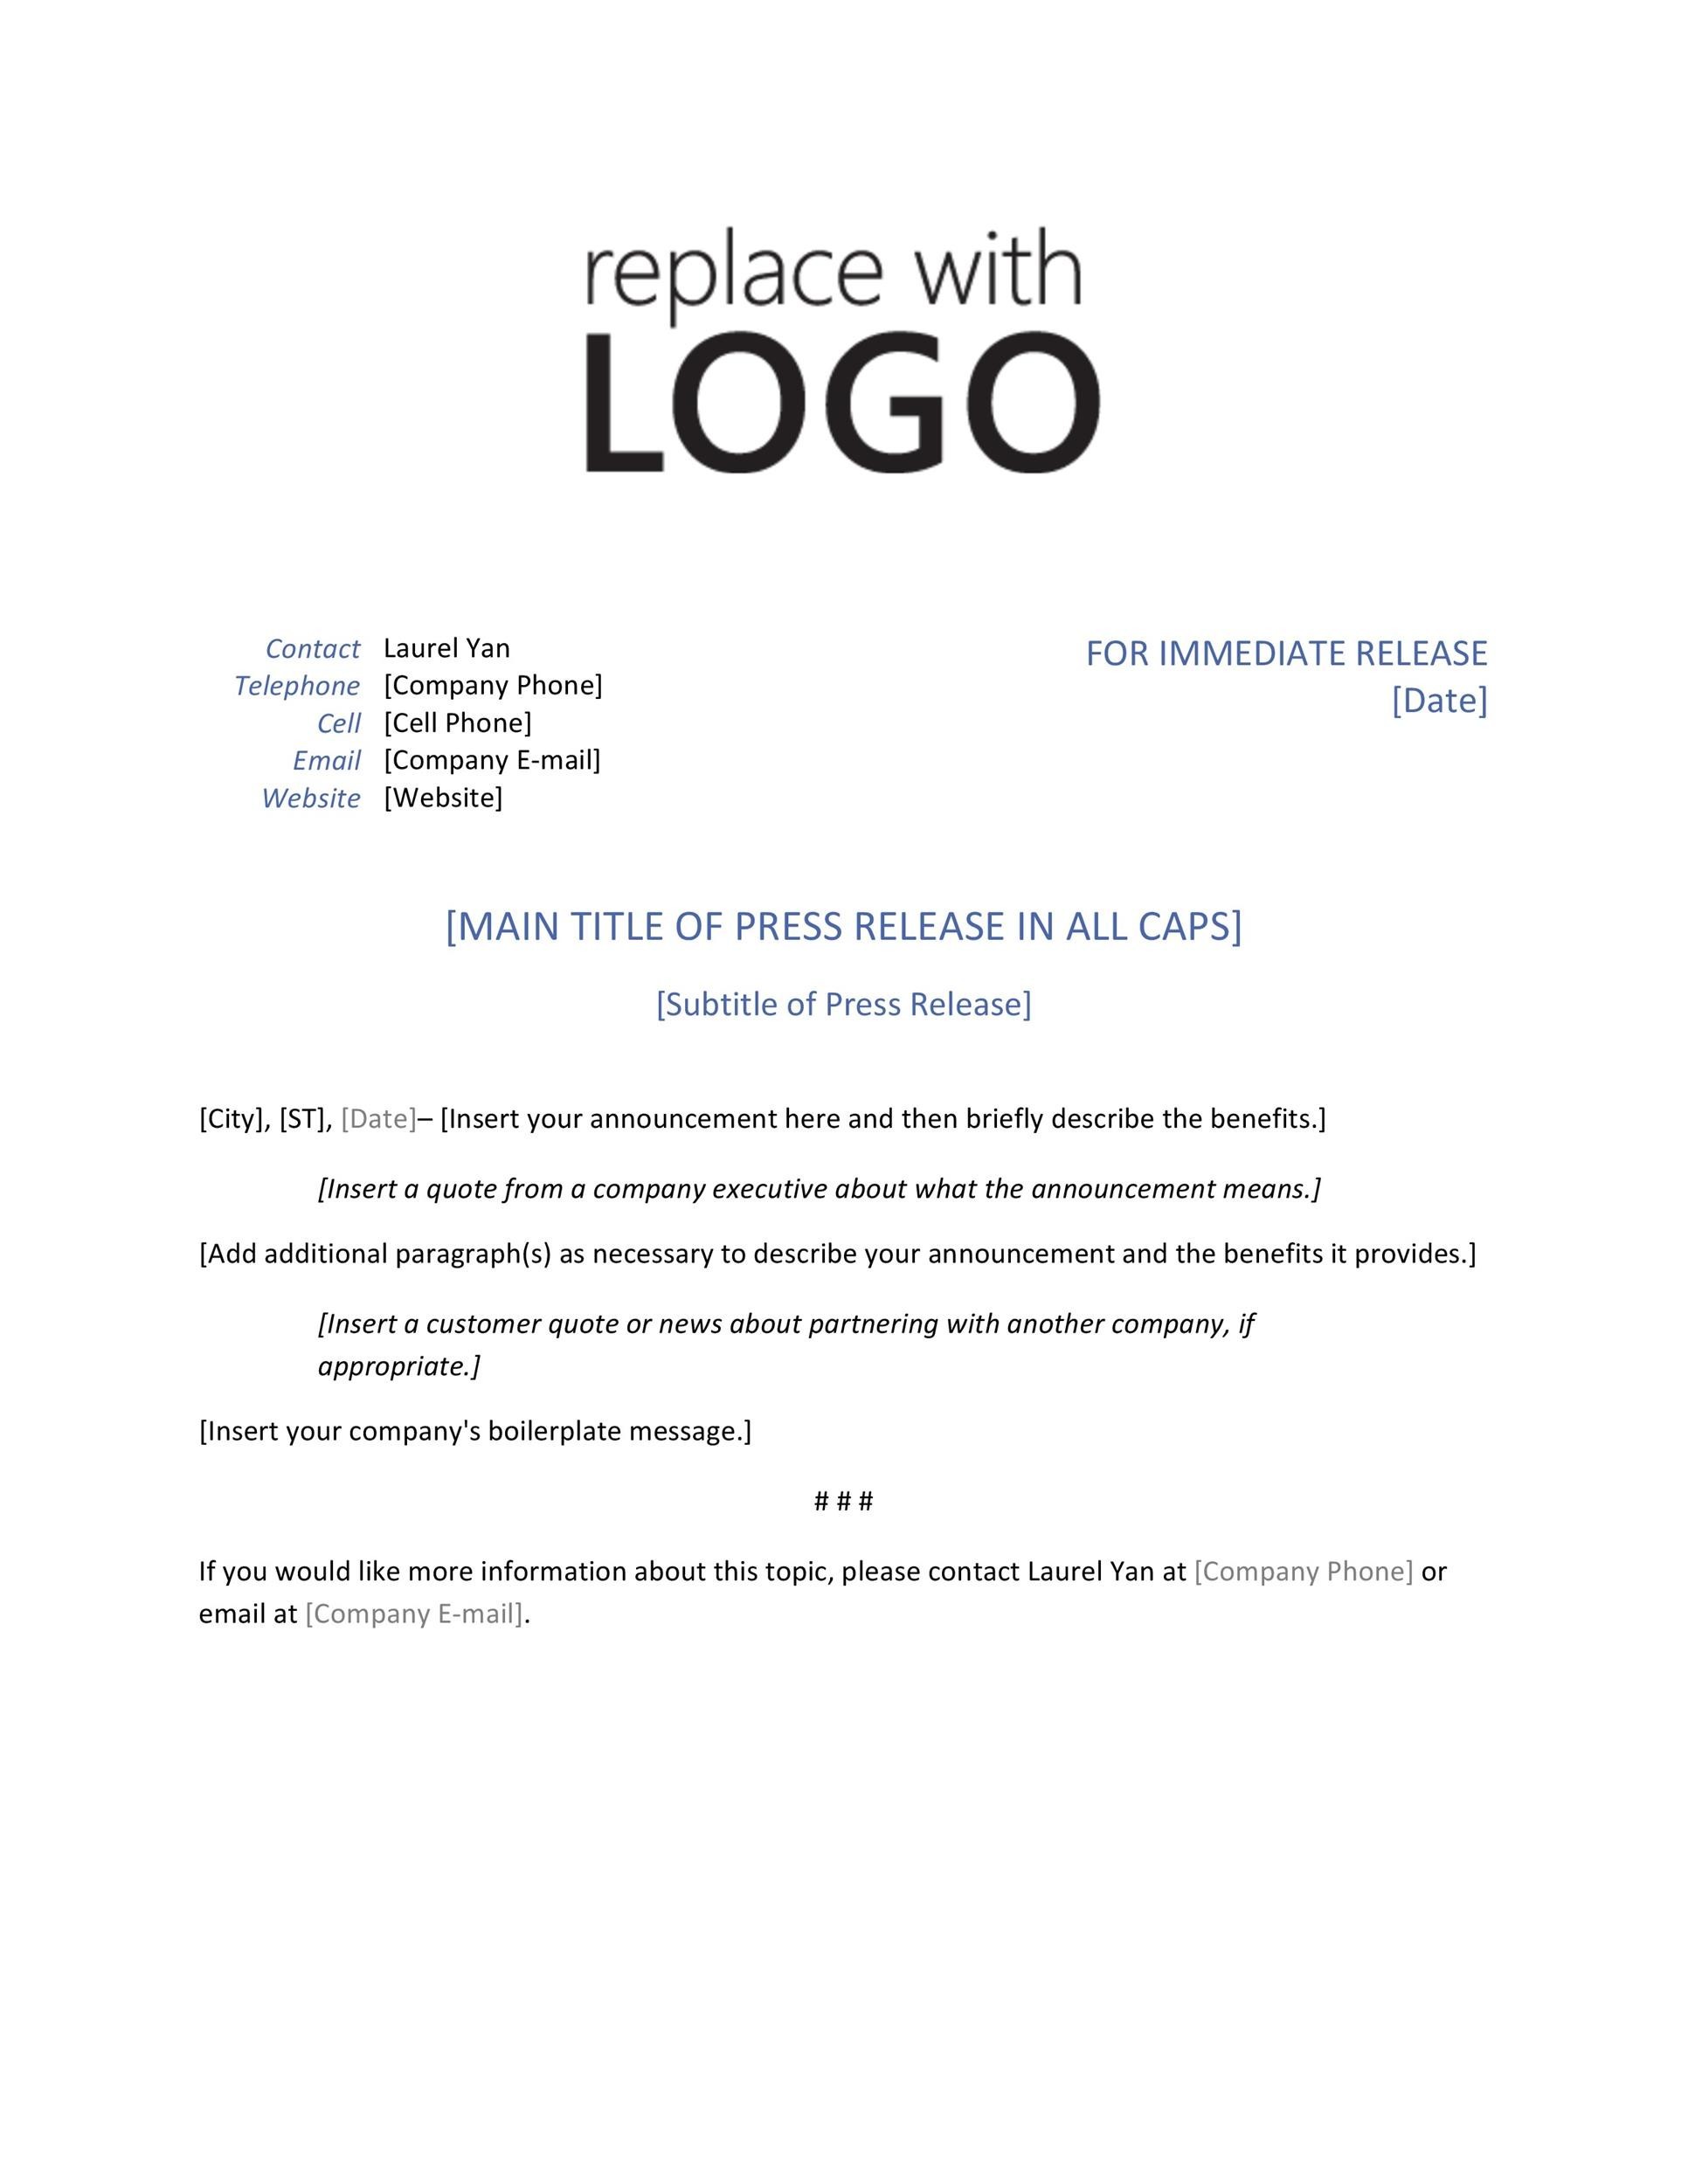 46 Press Release Format Templates Examples Samples ᐅ TemplateLab